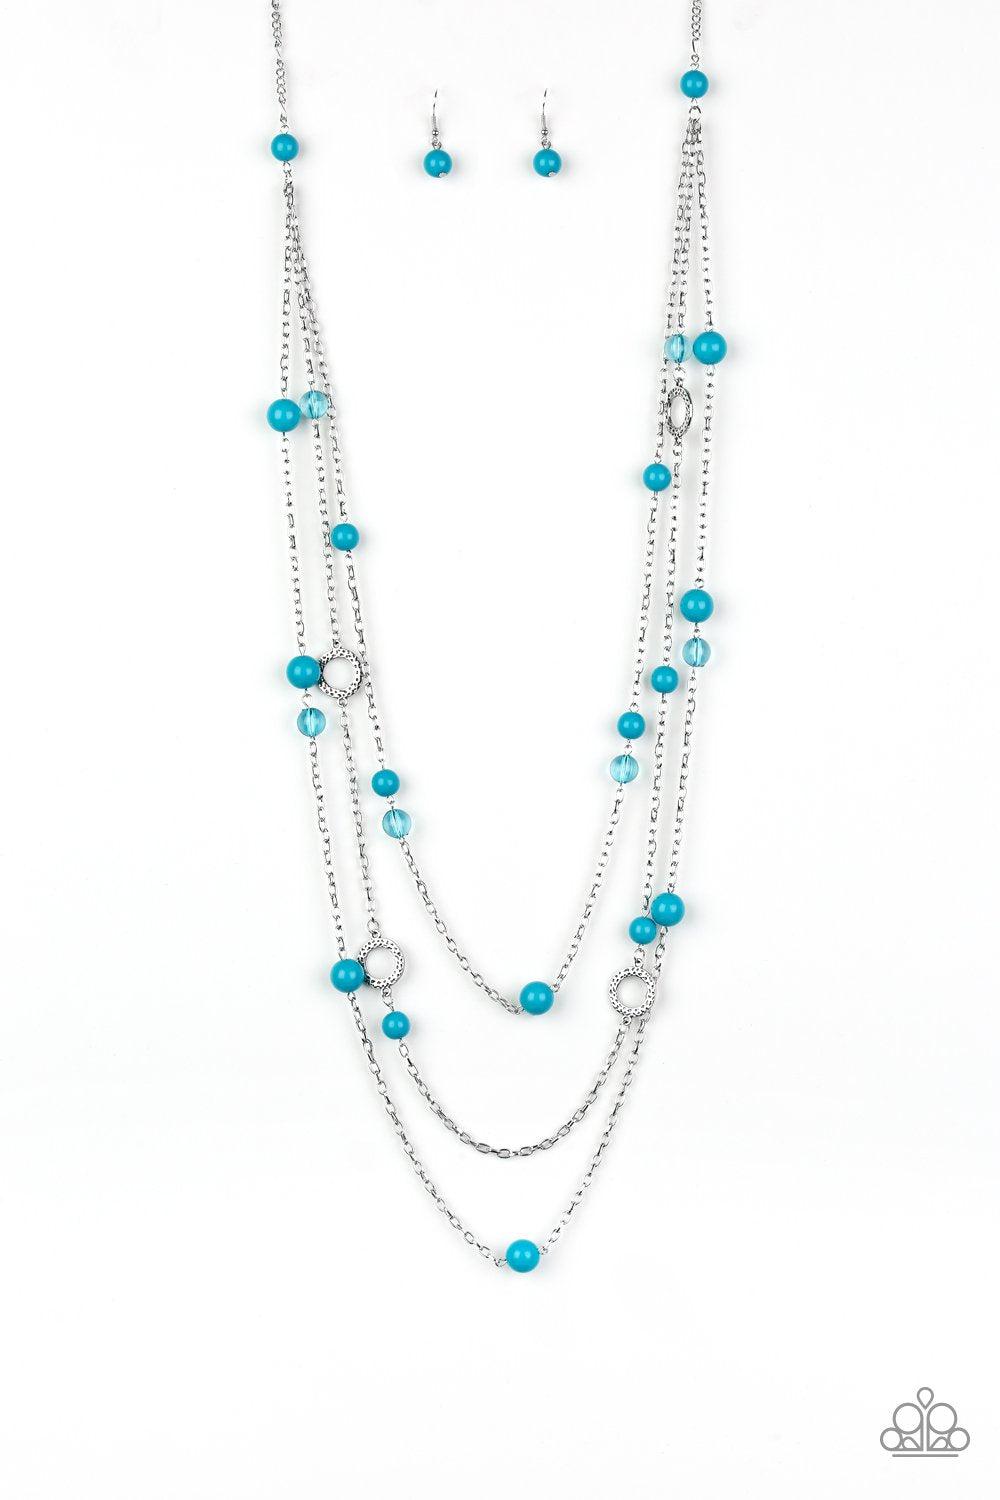 Brilliant Bliss Blue and Silver Necklace - Paparazzi Accessories - lightbox -CarasShop.com - $5 Jewelry by Cara Jewels